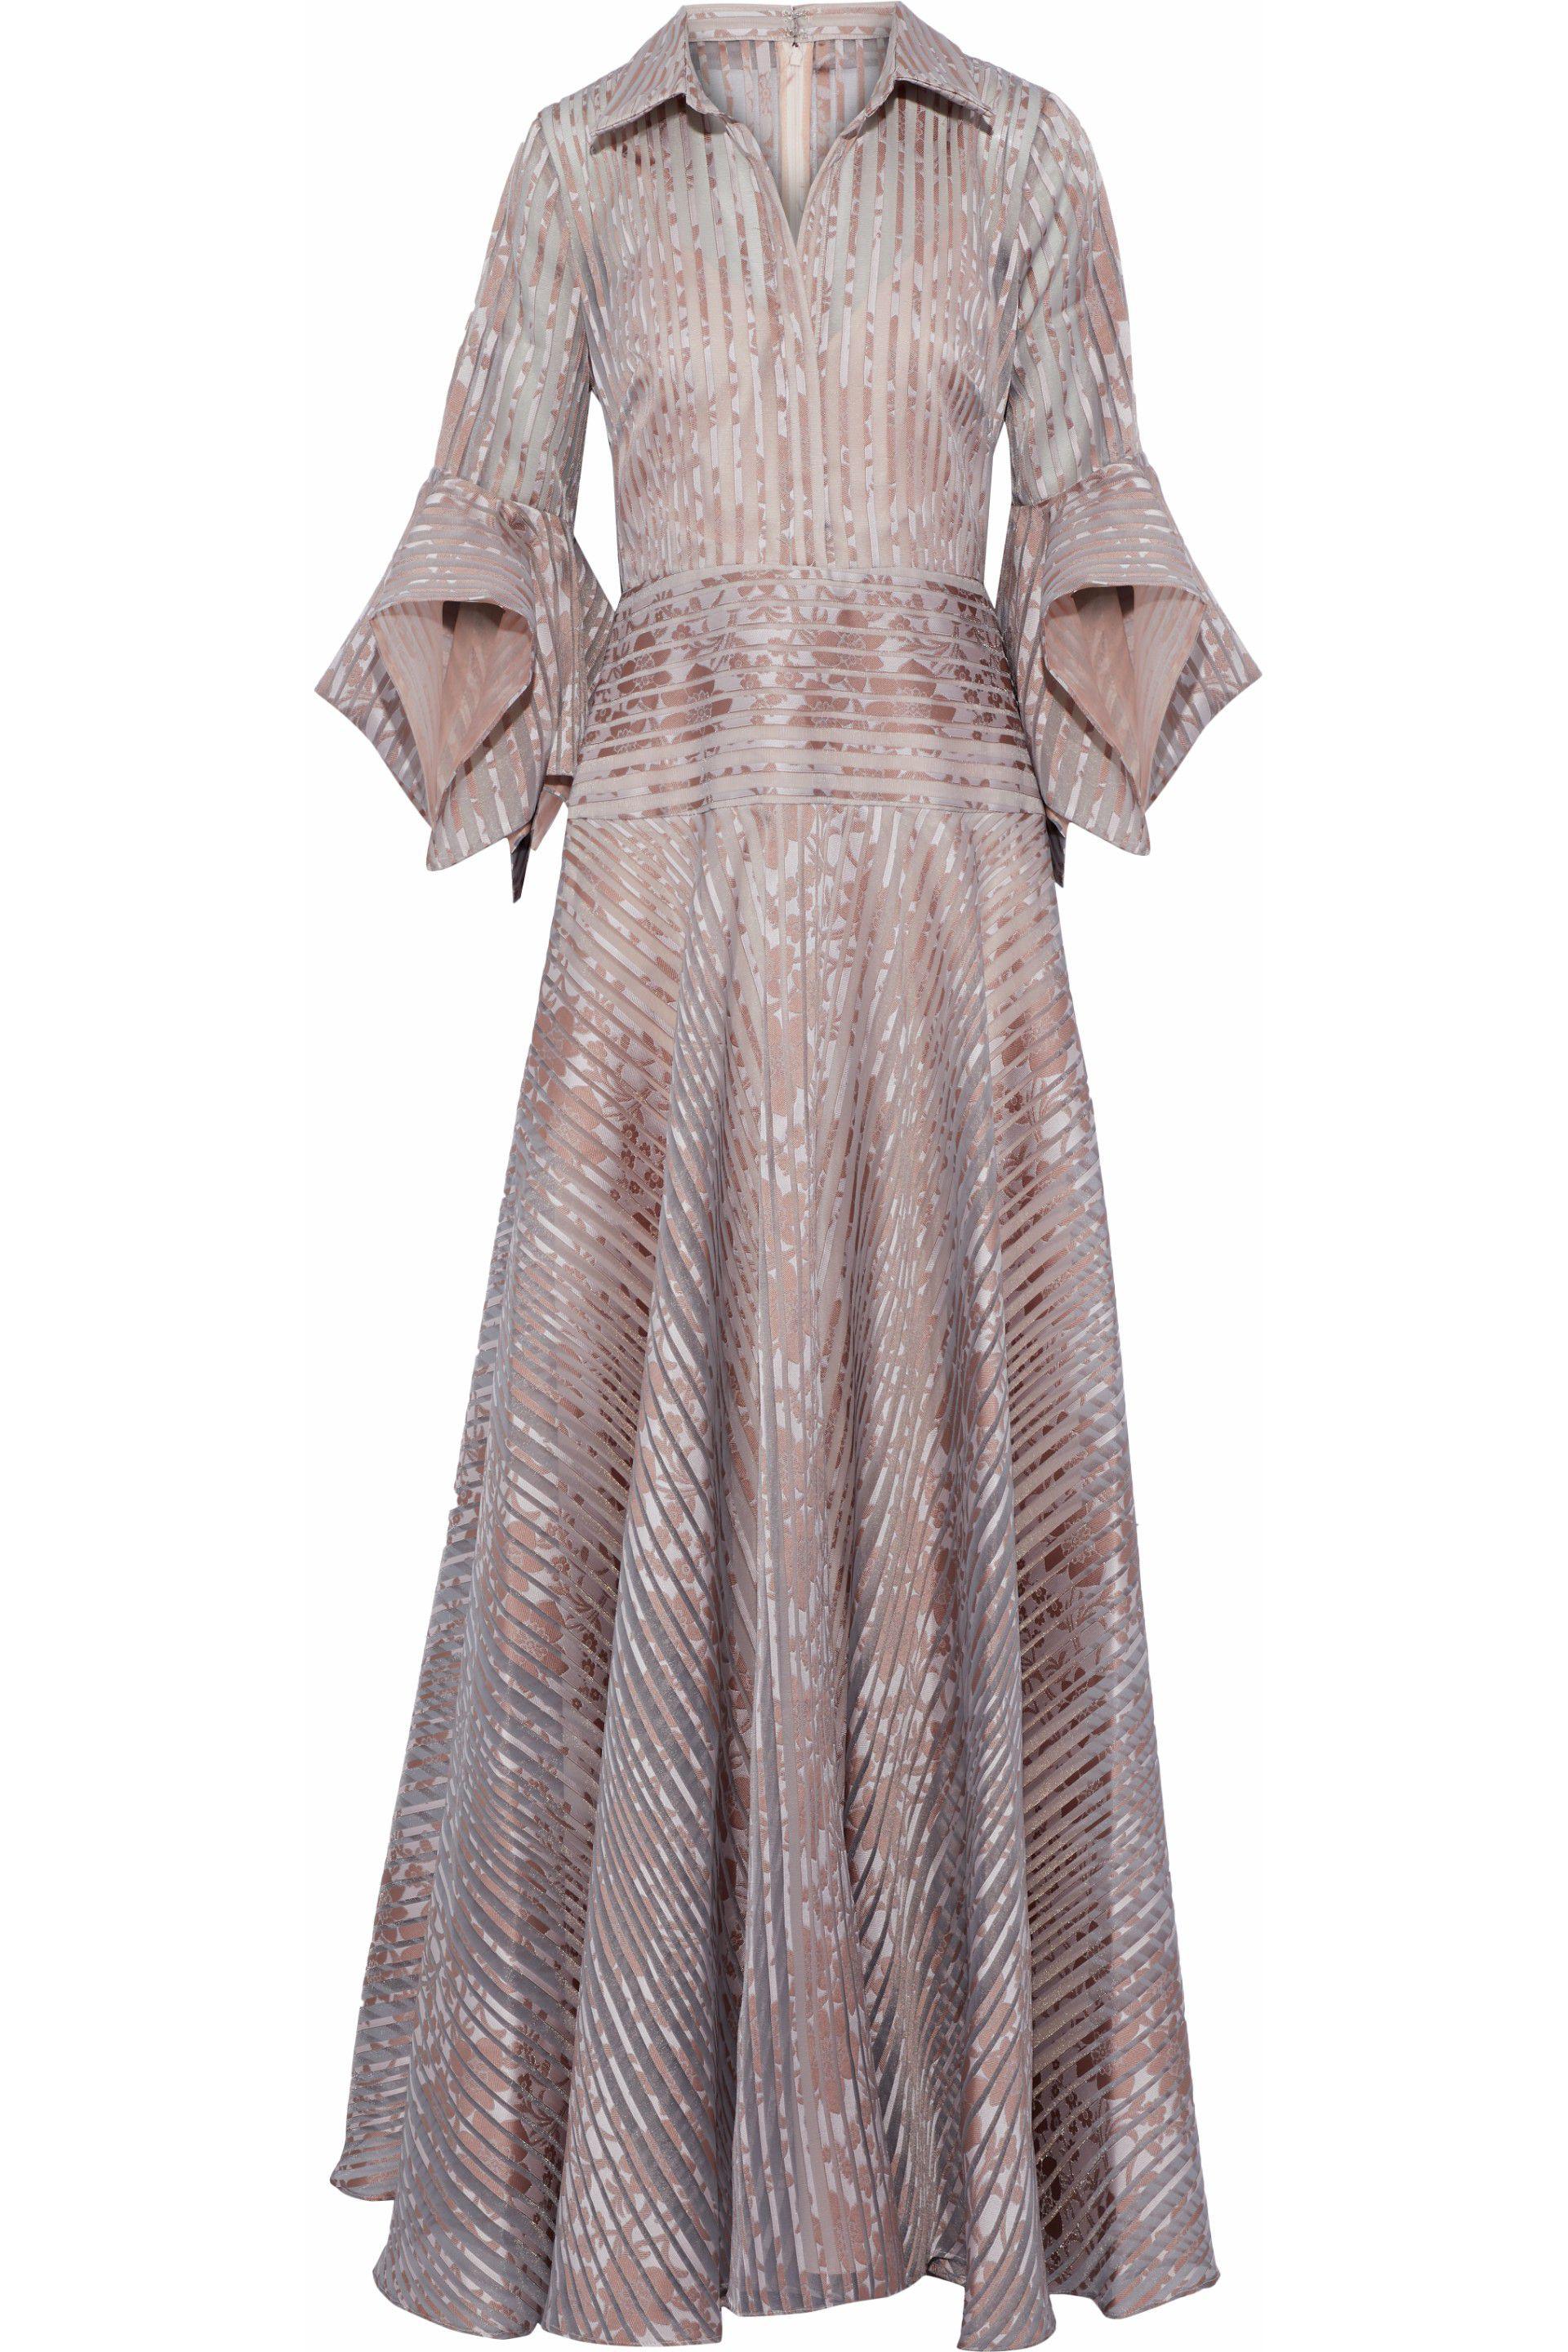 Badgley Mischka Ruffled Woven-paneled Floral-jacquard Gown Antique Rose ...